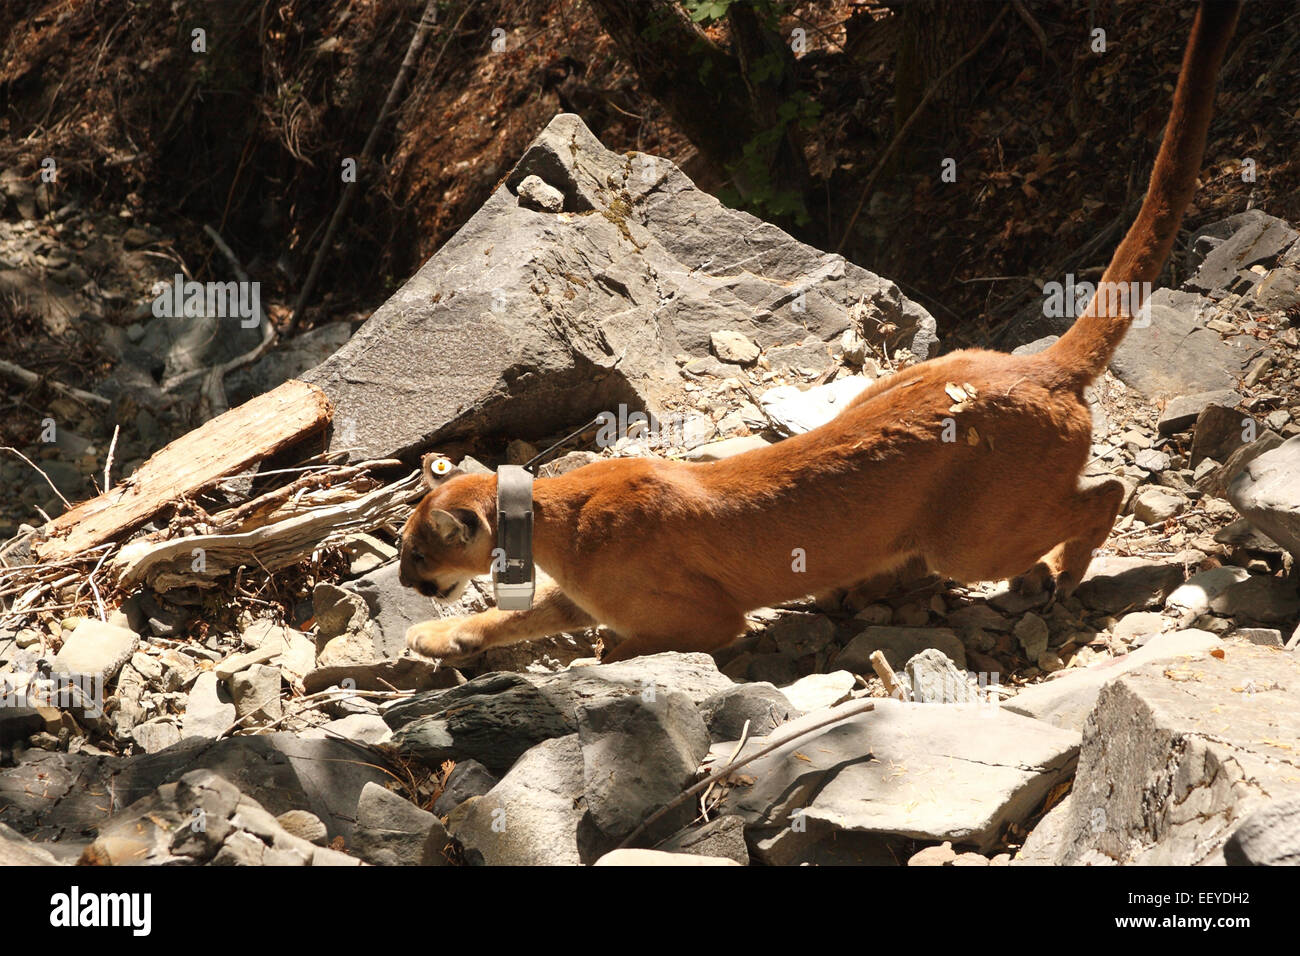 A Mountain Lion (also called Puma or Cougar) wearing a radio-tracking collar and running with her tail up. Stock Photo